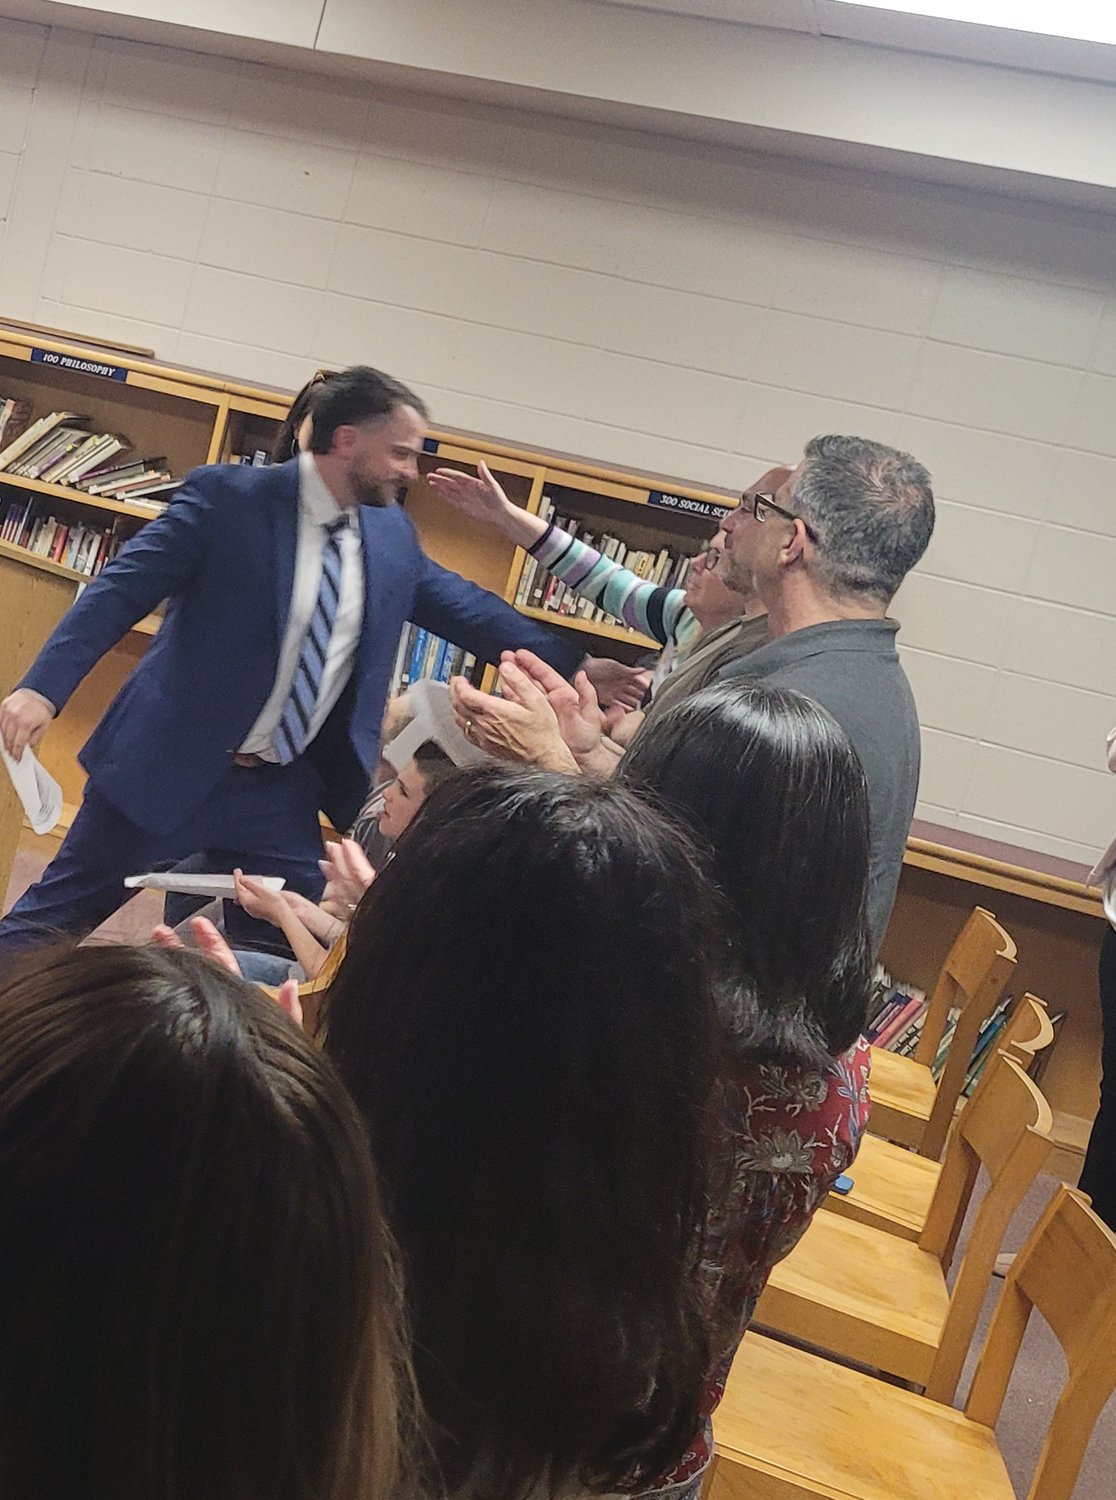 HUGS ALL AROUND: Matt Velino, the now former assistant principal at Johnston Senior High School has been promoted to the school’s top administrator post — the Principal.